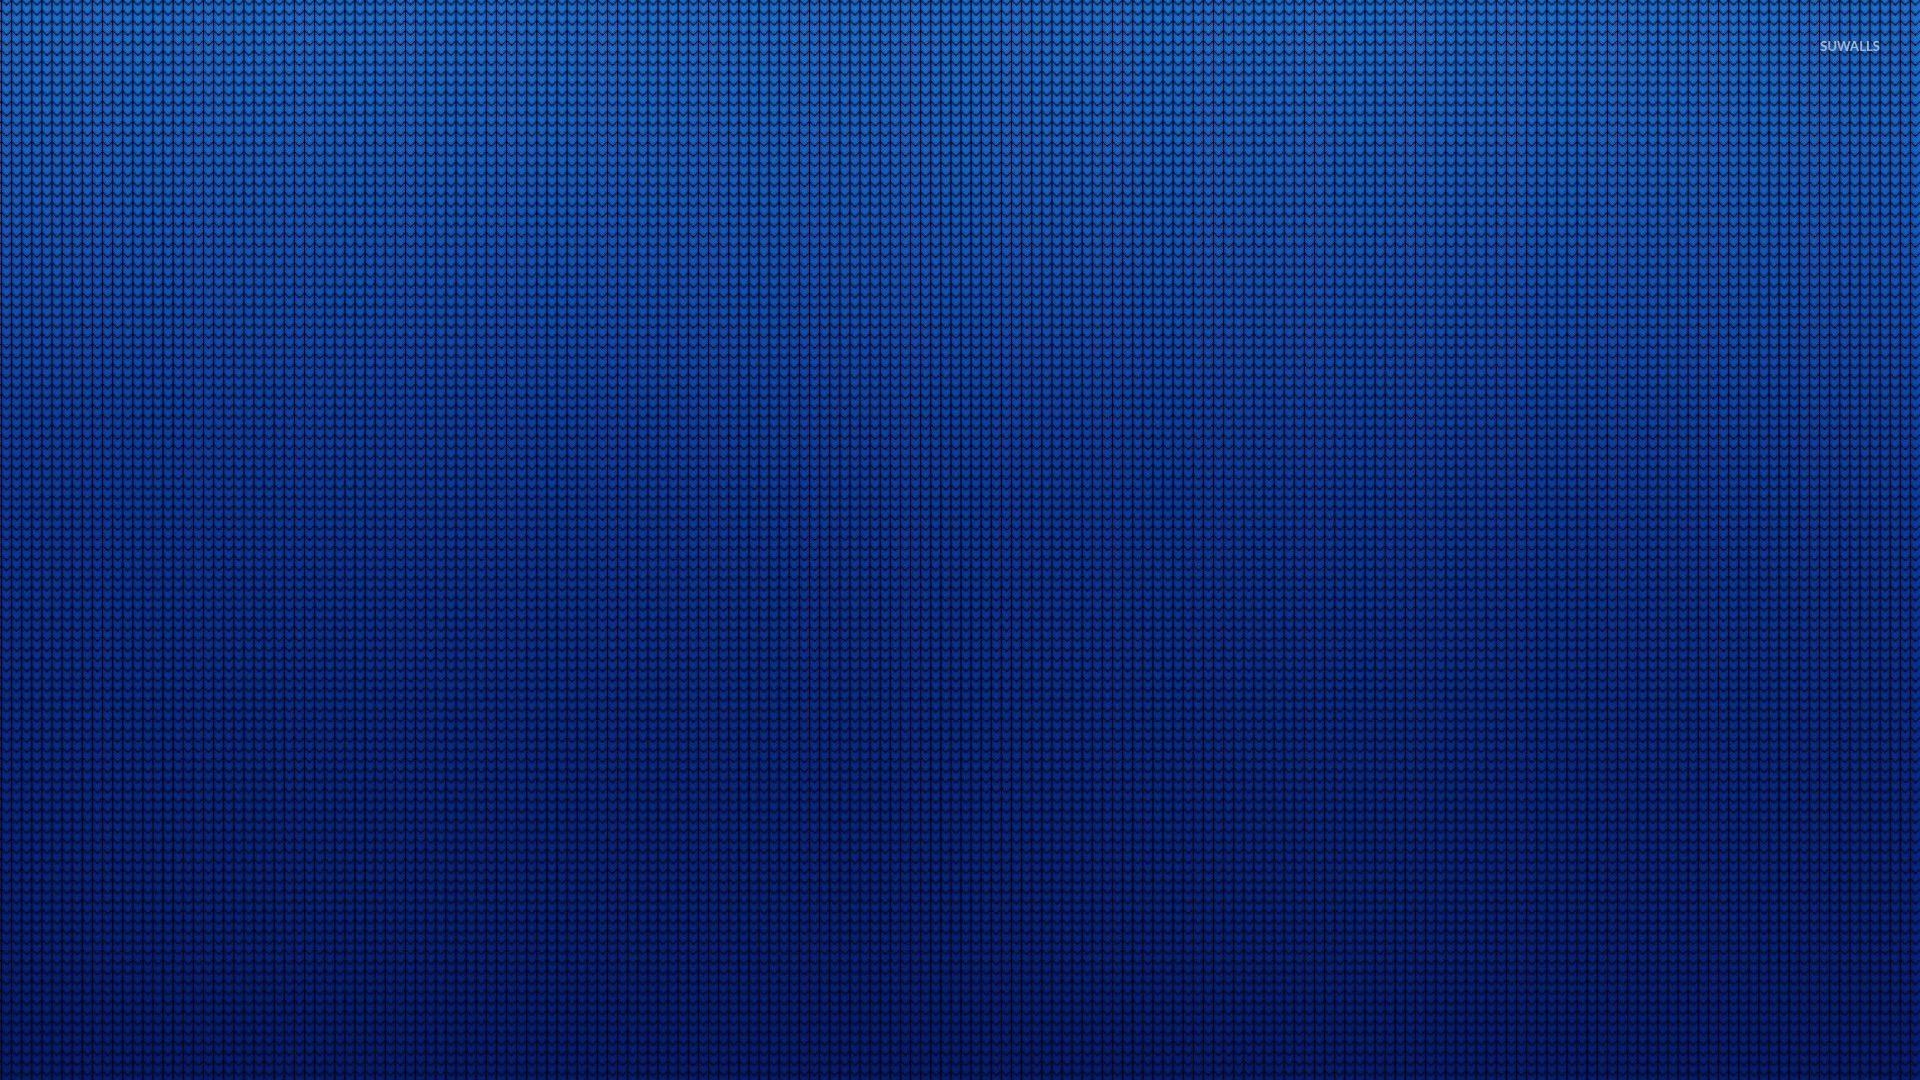 1920x1080 Blue pattern wallpaper - Abstract wallpapers - #26263